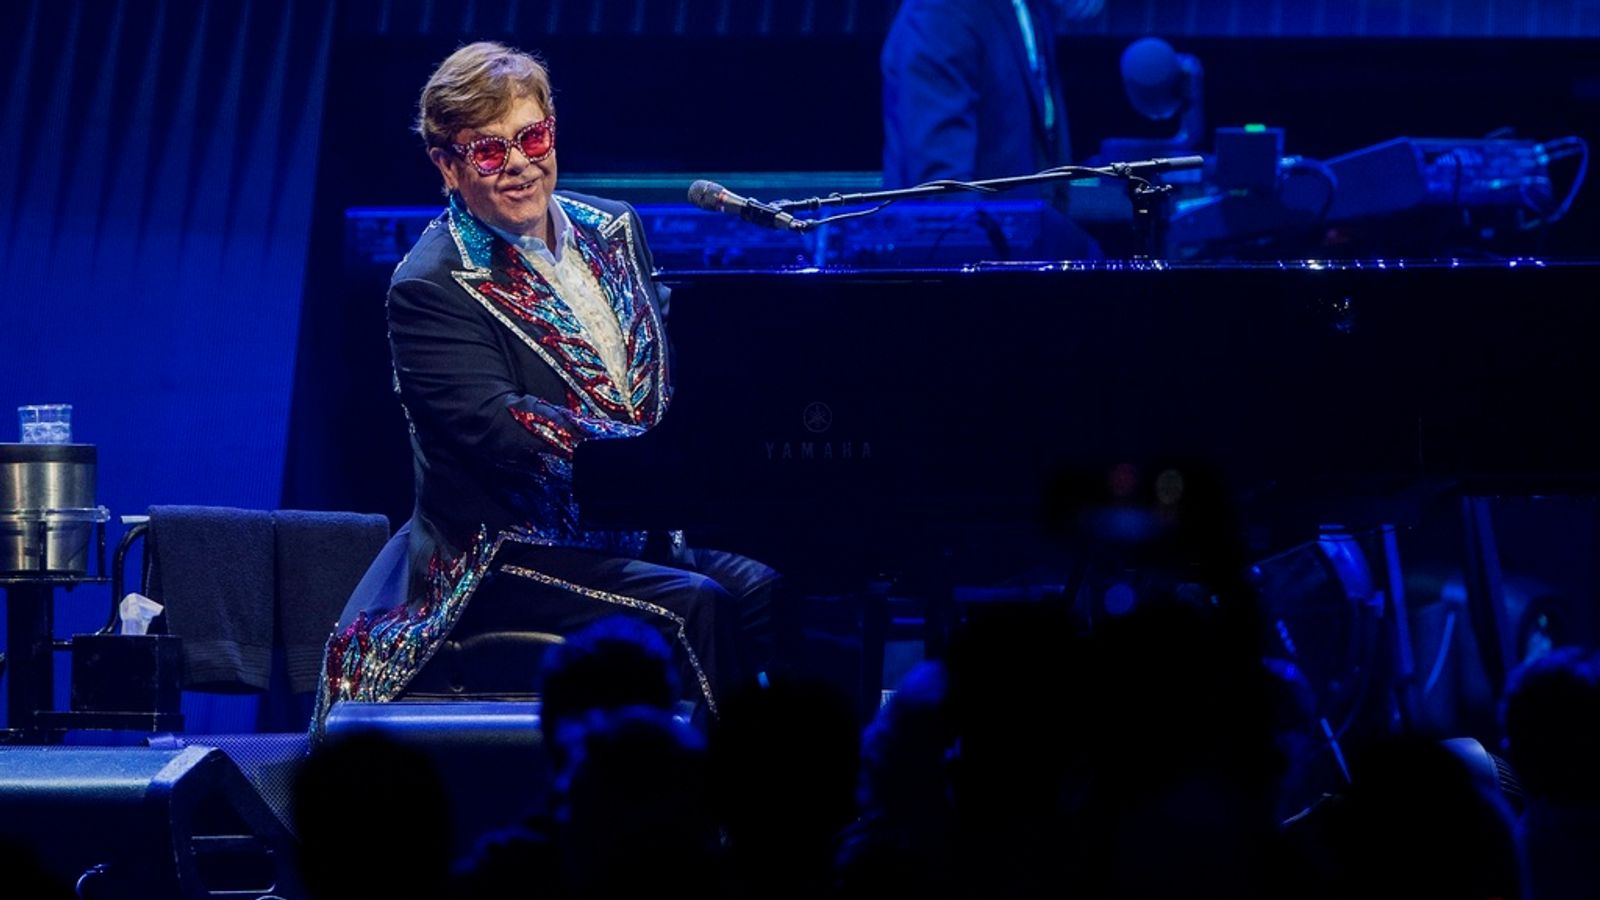 Sir Elton John plays last gig of farewell tour, closing with emotional message to fans